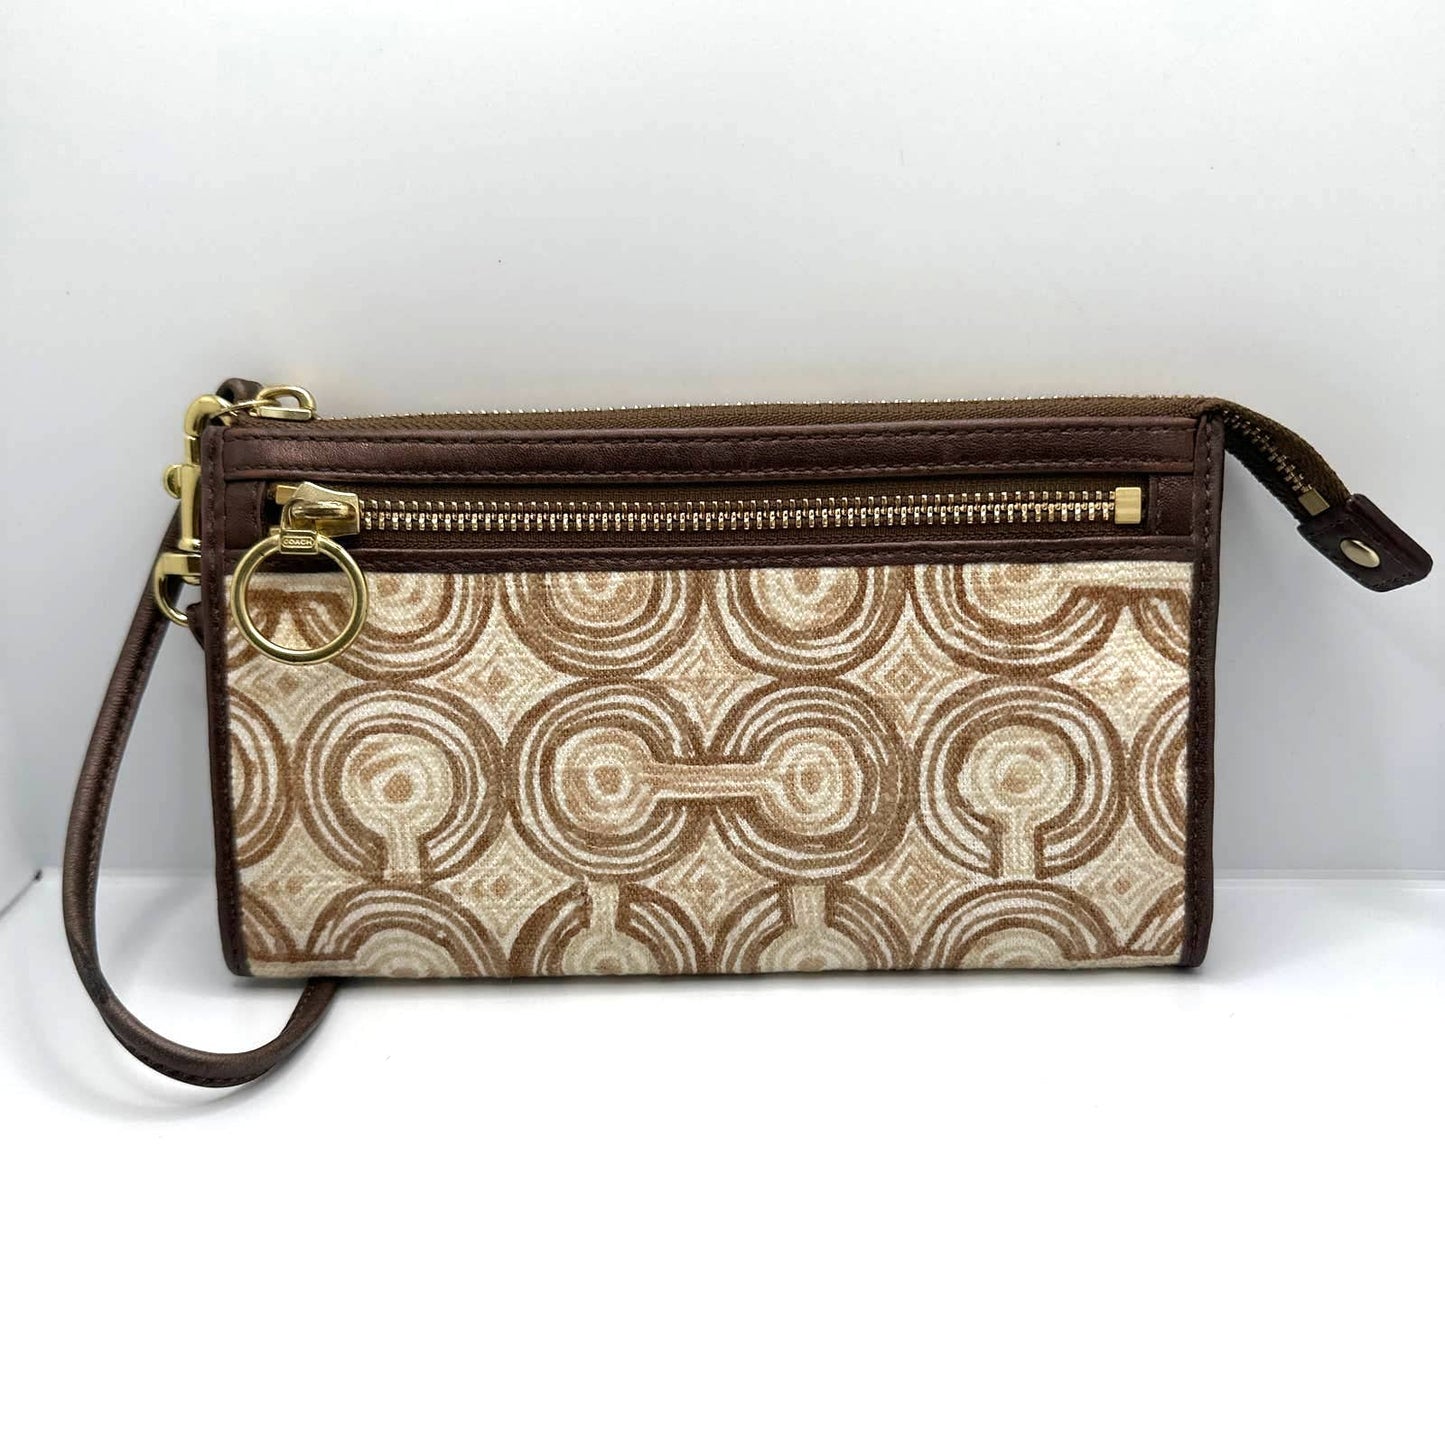 COACH Brown and Aud Tan Optic Swirl Wallet / Wristlet